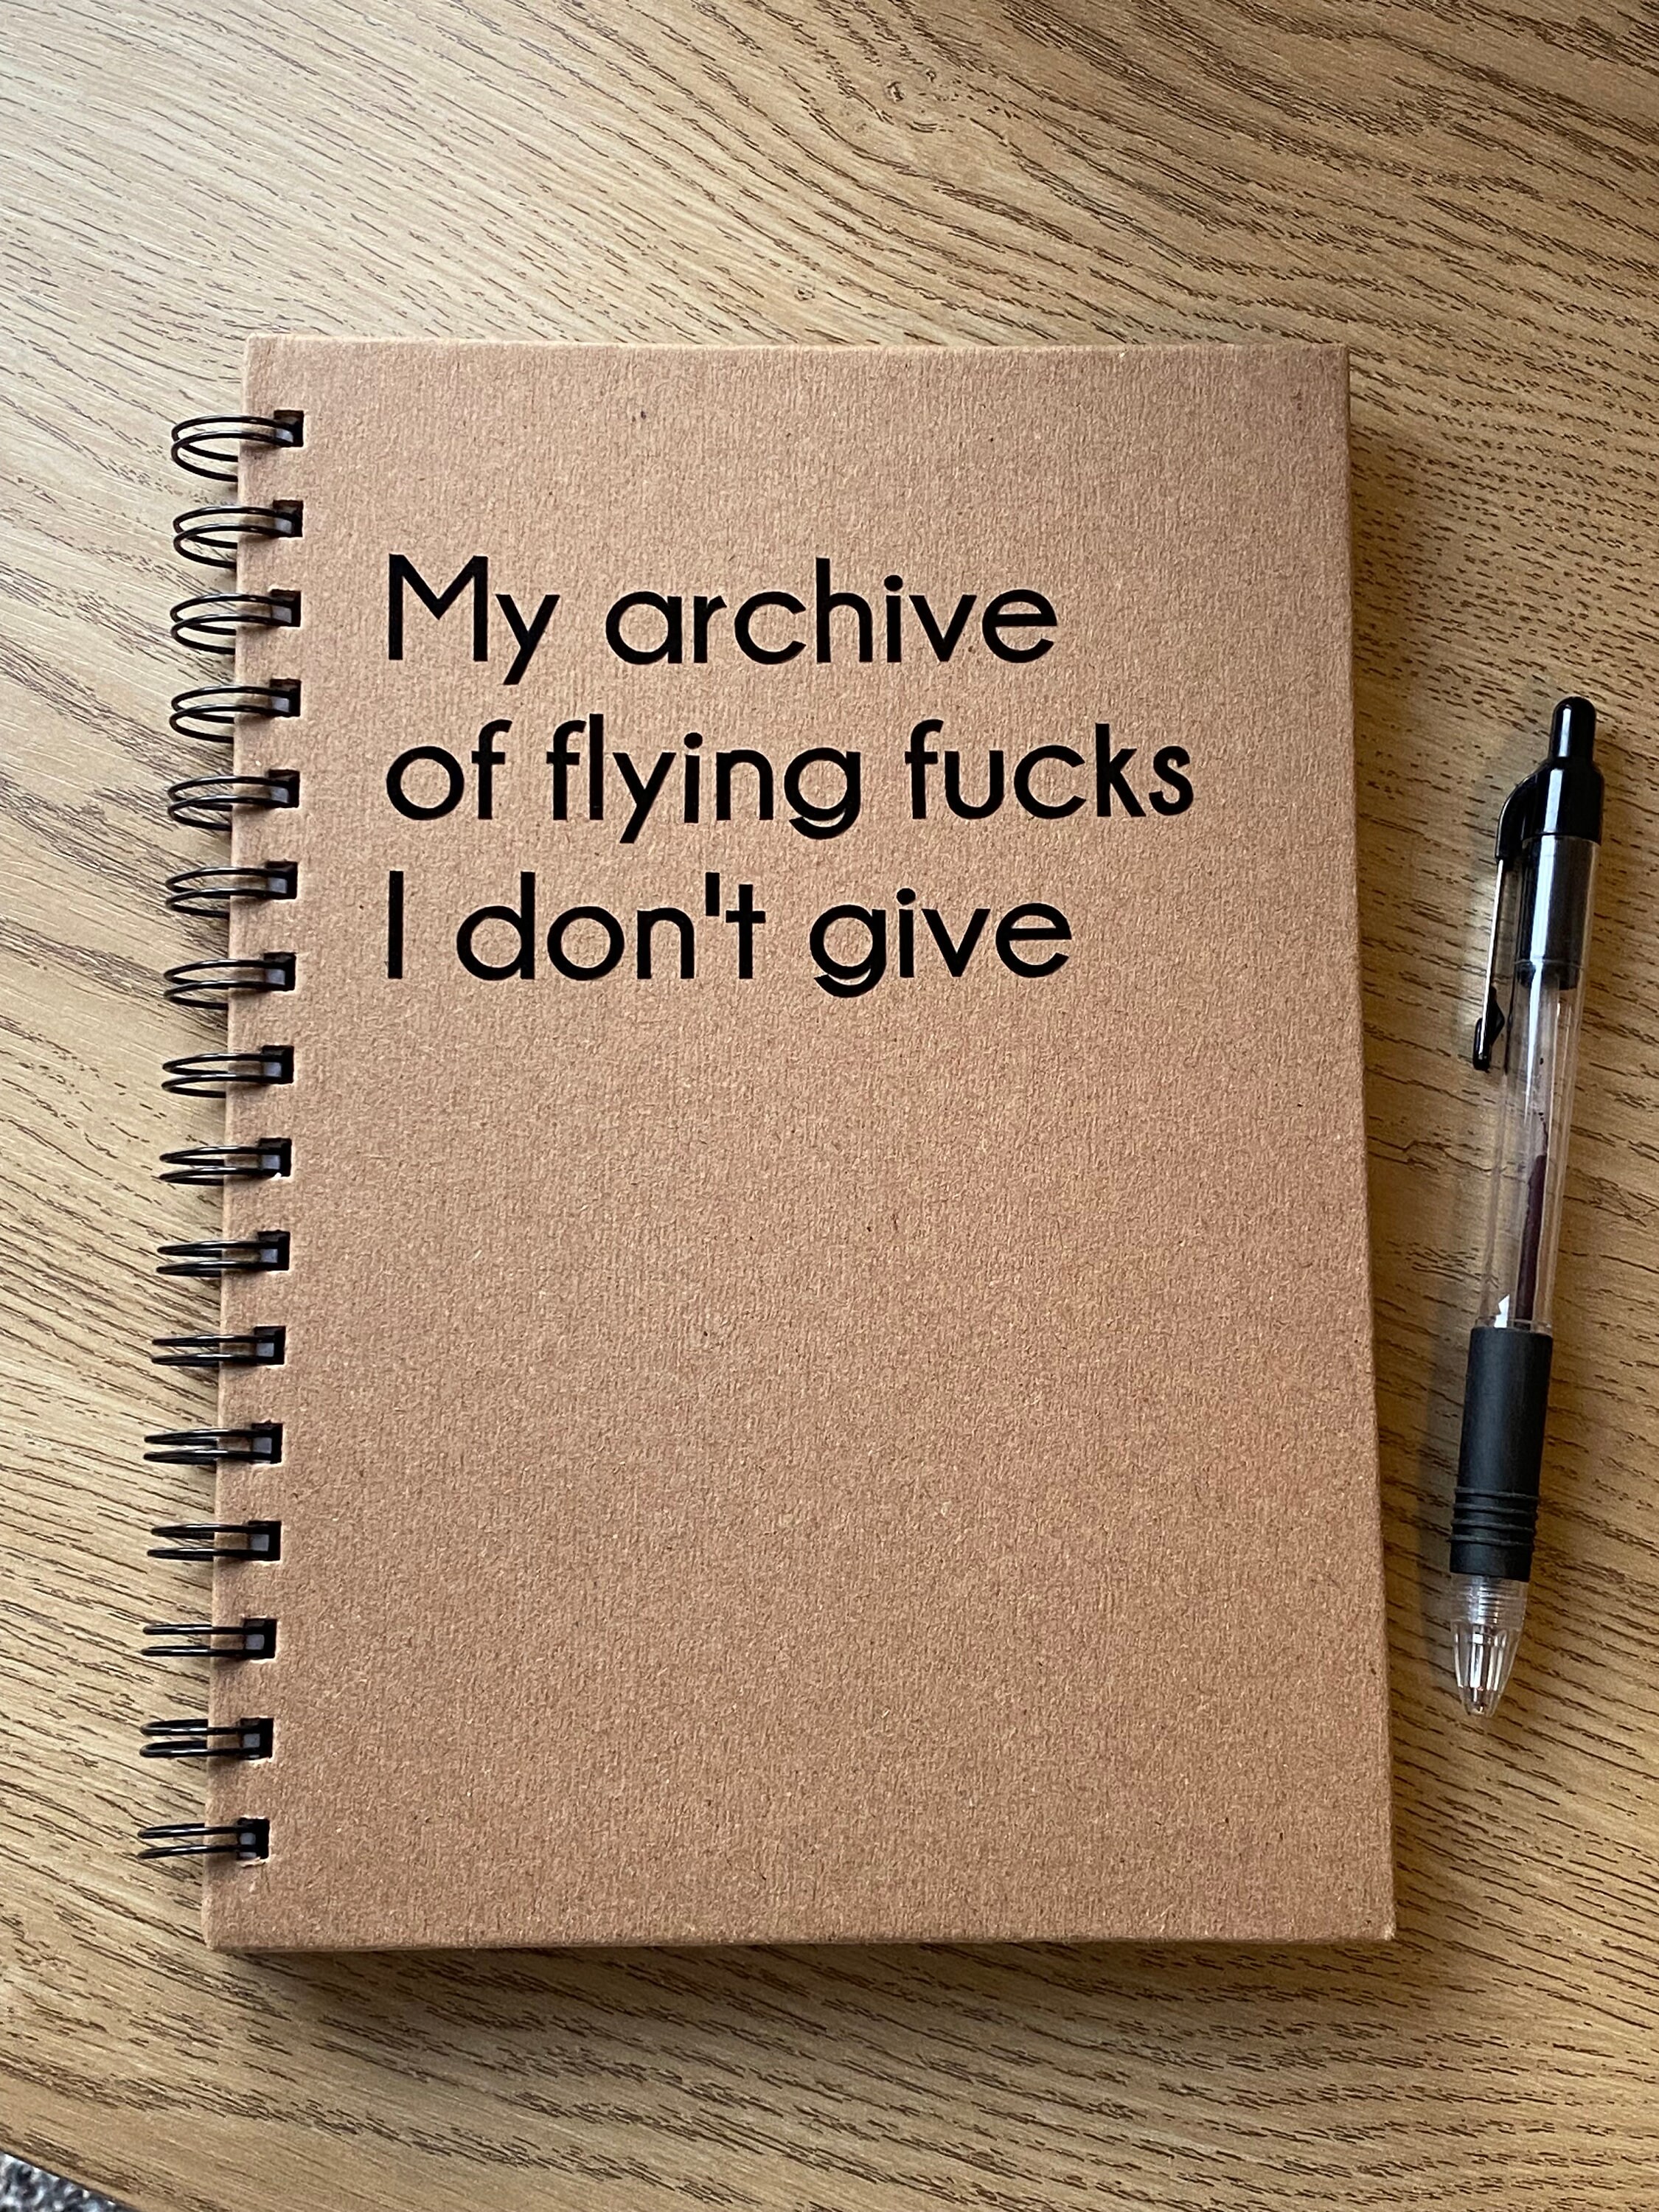 Fresh Outta Fucks Pad and Pen, Fresh Out of Fcks Pen and Pad Set, Fresh  Outta Fucks Pad and Pen, Fresh Out of Fcks Pen Set, Fuck Sticky Notes,  Funny